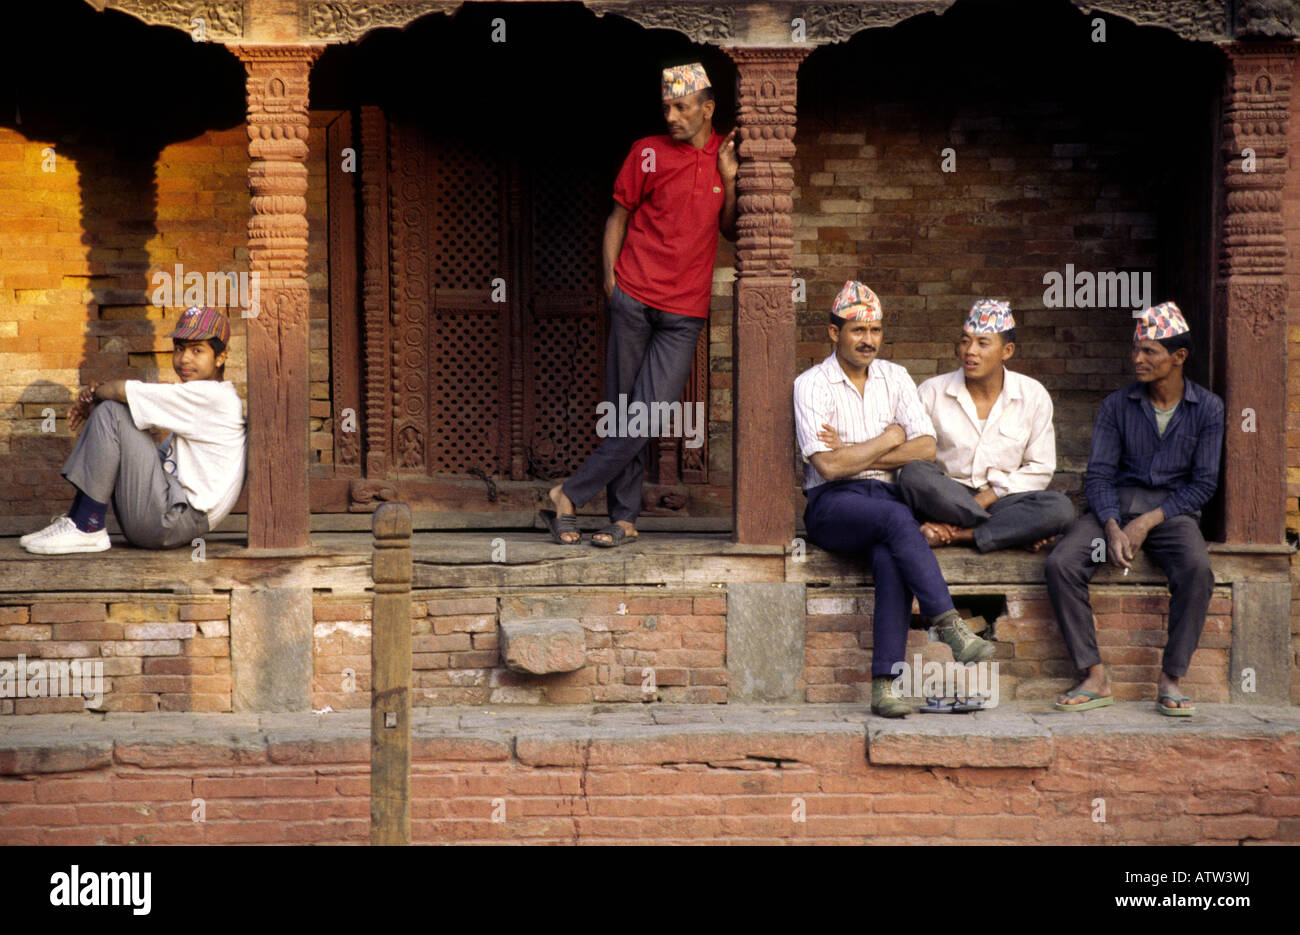 Nepali men rest under the arches of an old building in Durbur Square in Kathmandu in Nepal Stock Photo